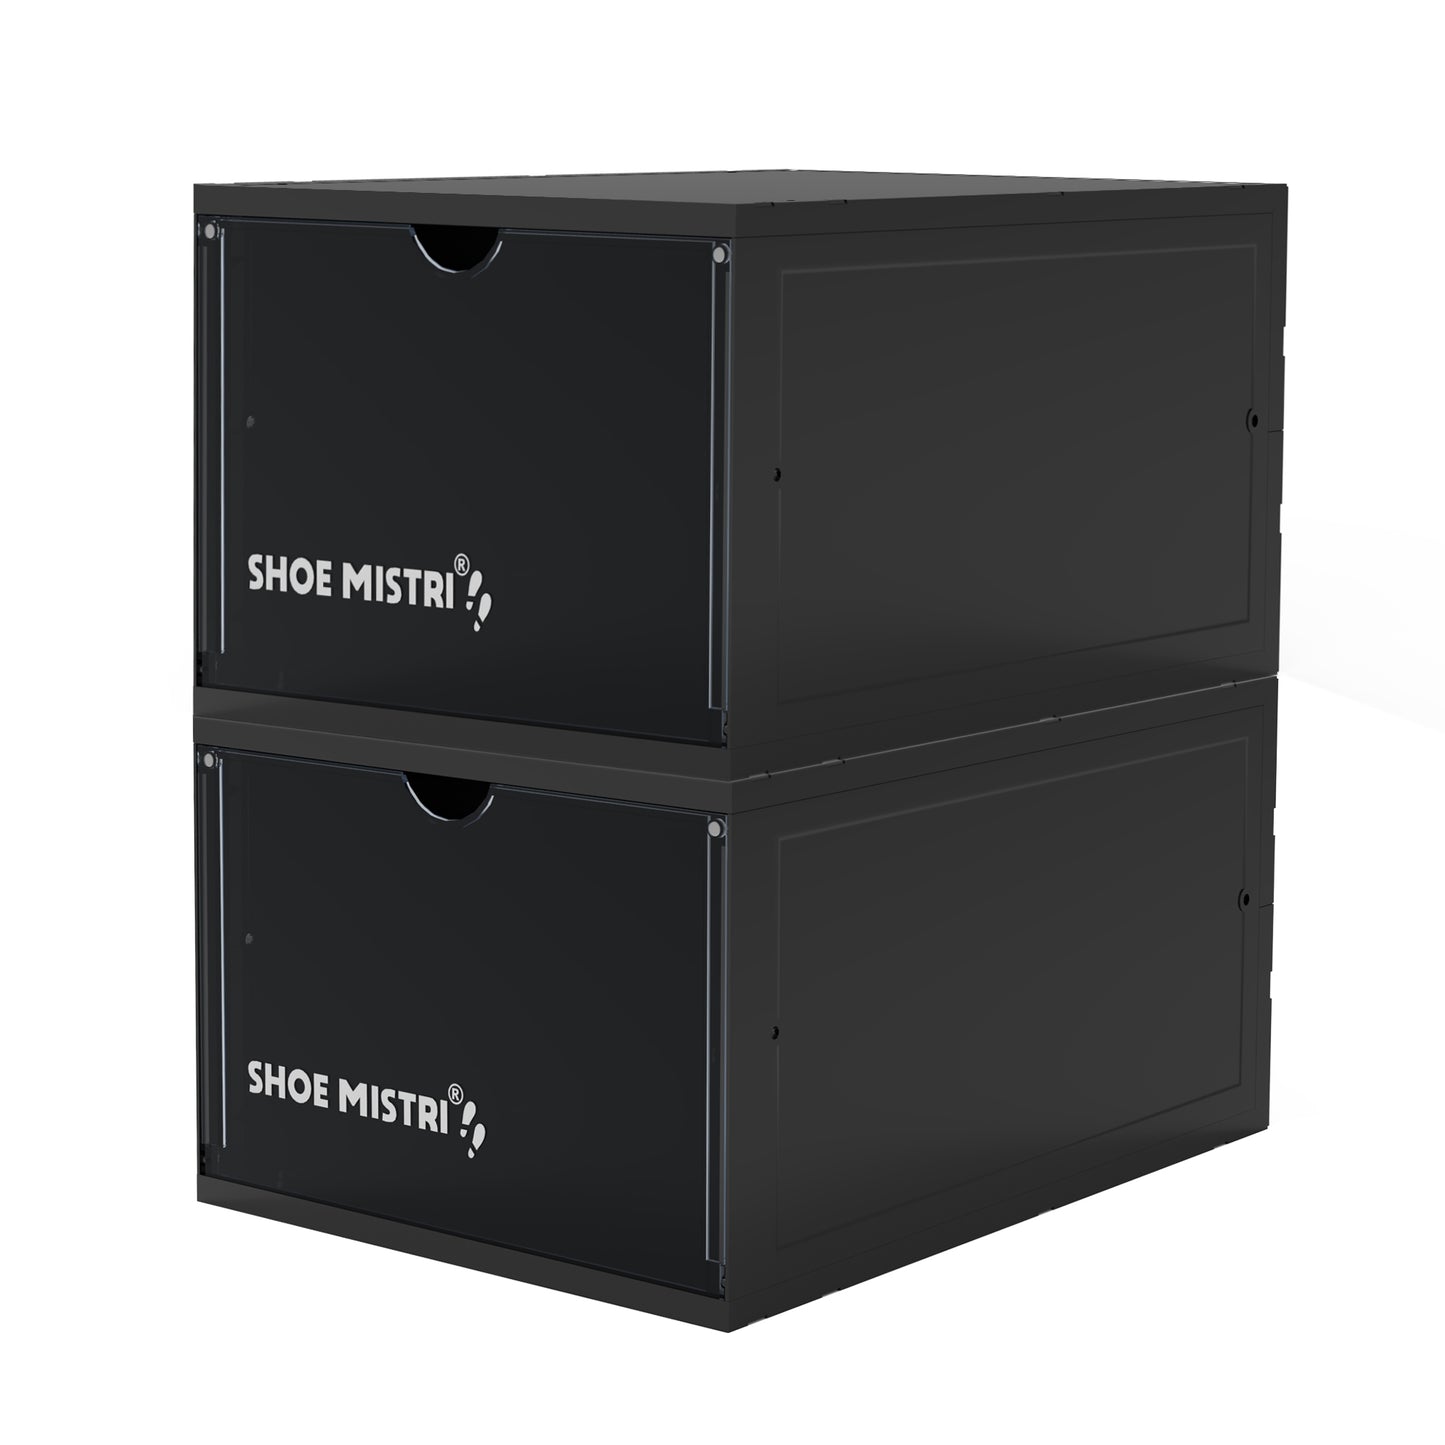 Shoe Mistri Sneaker Container Storage Box, Shoe Organizer for Closet, Clear Space Saving Foldable Plastic Stackable Shoes Holder or Crate (Black)